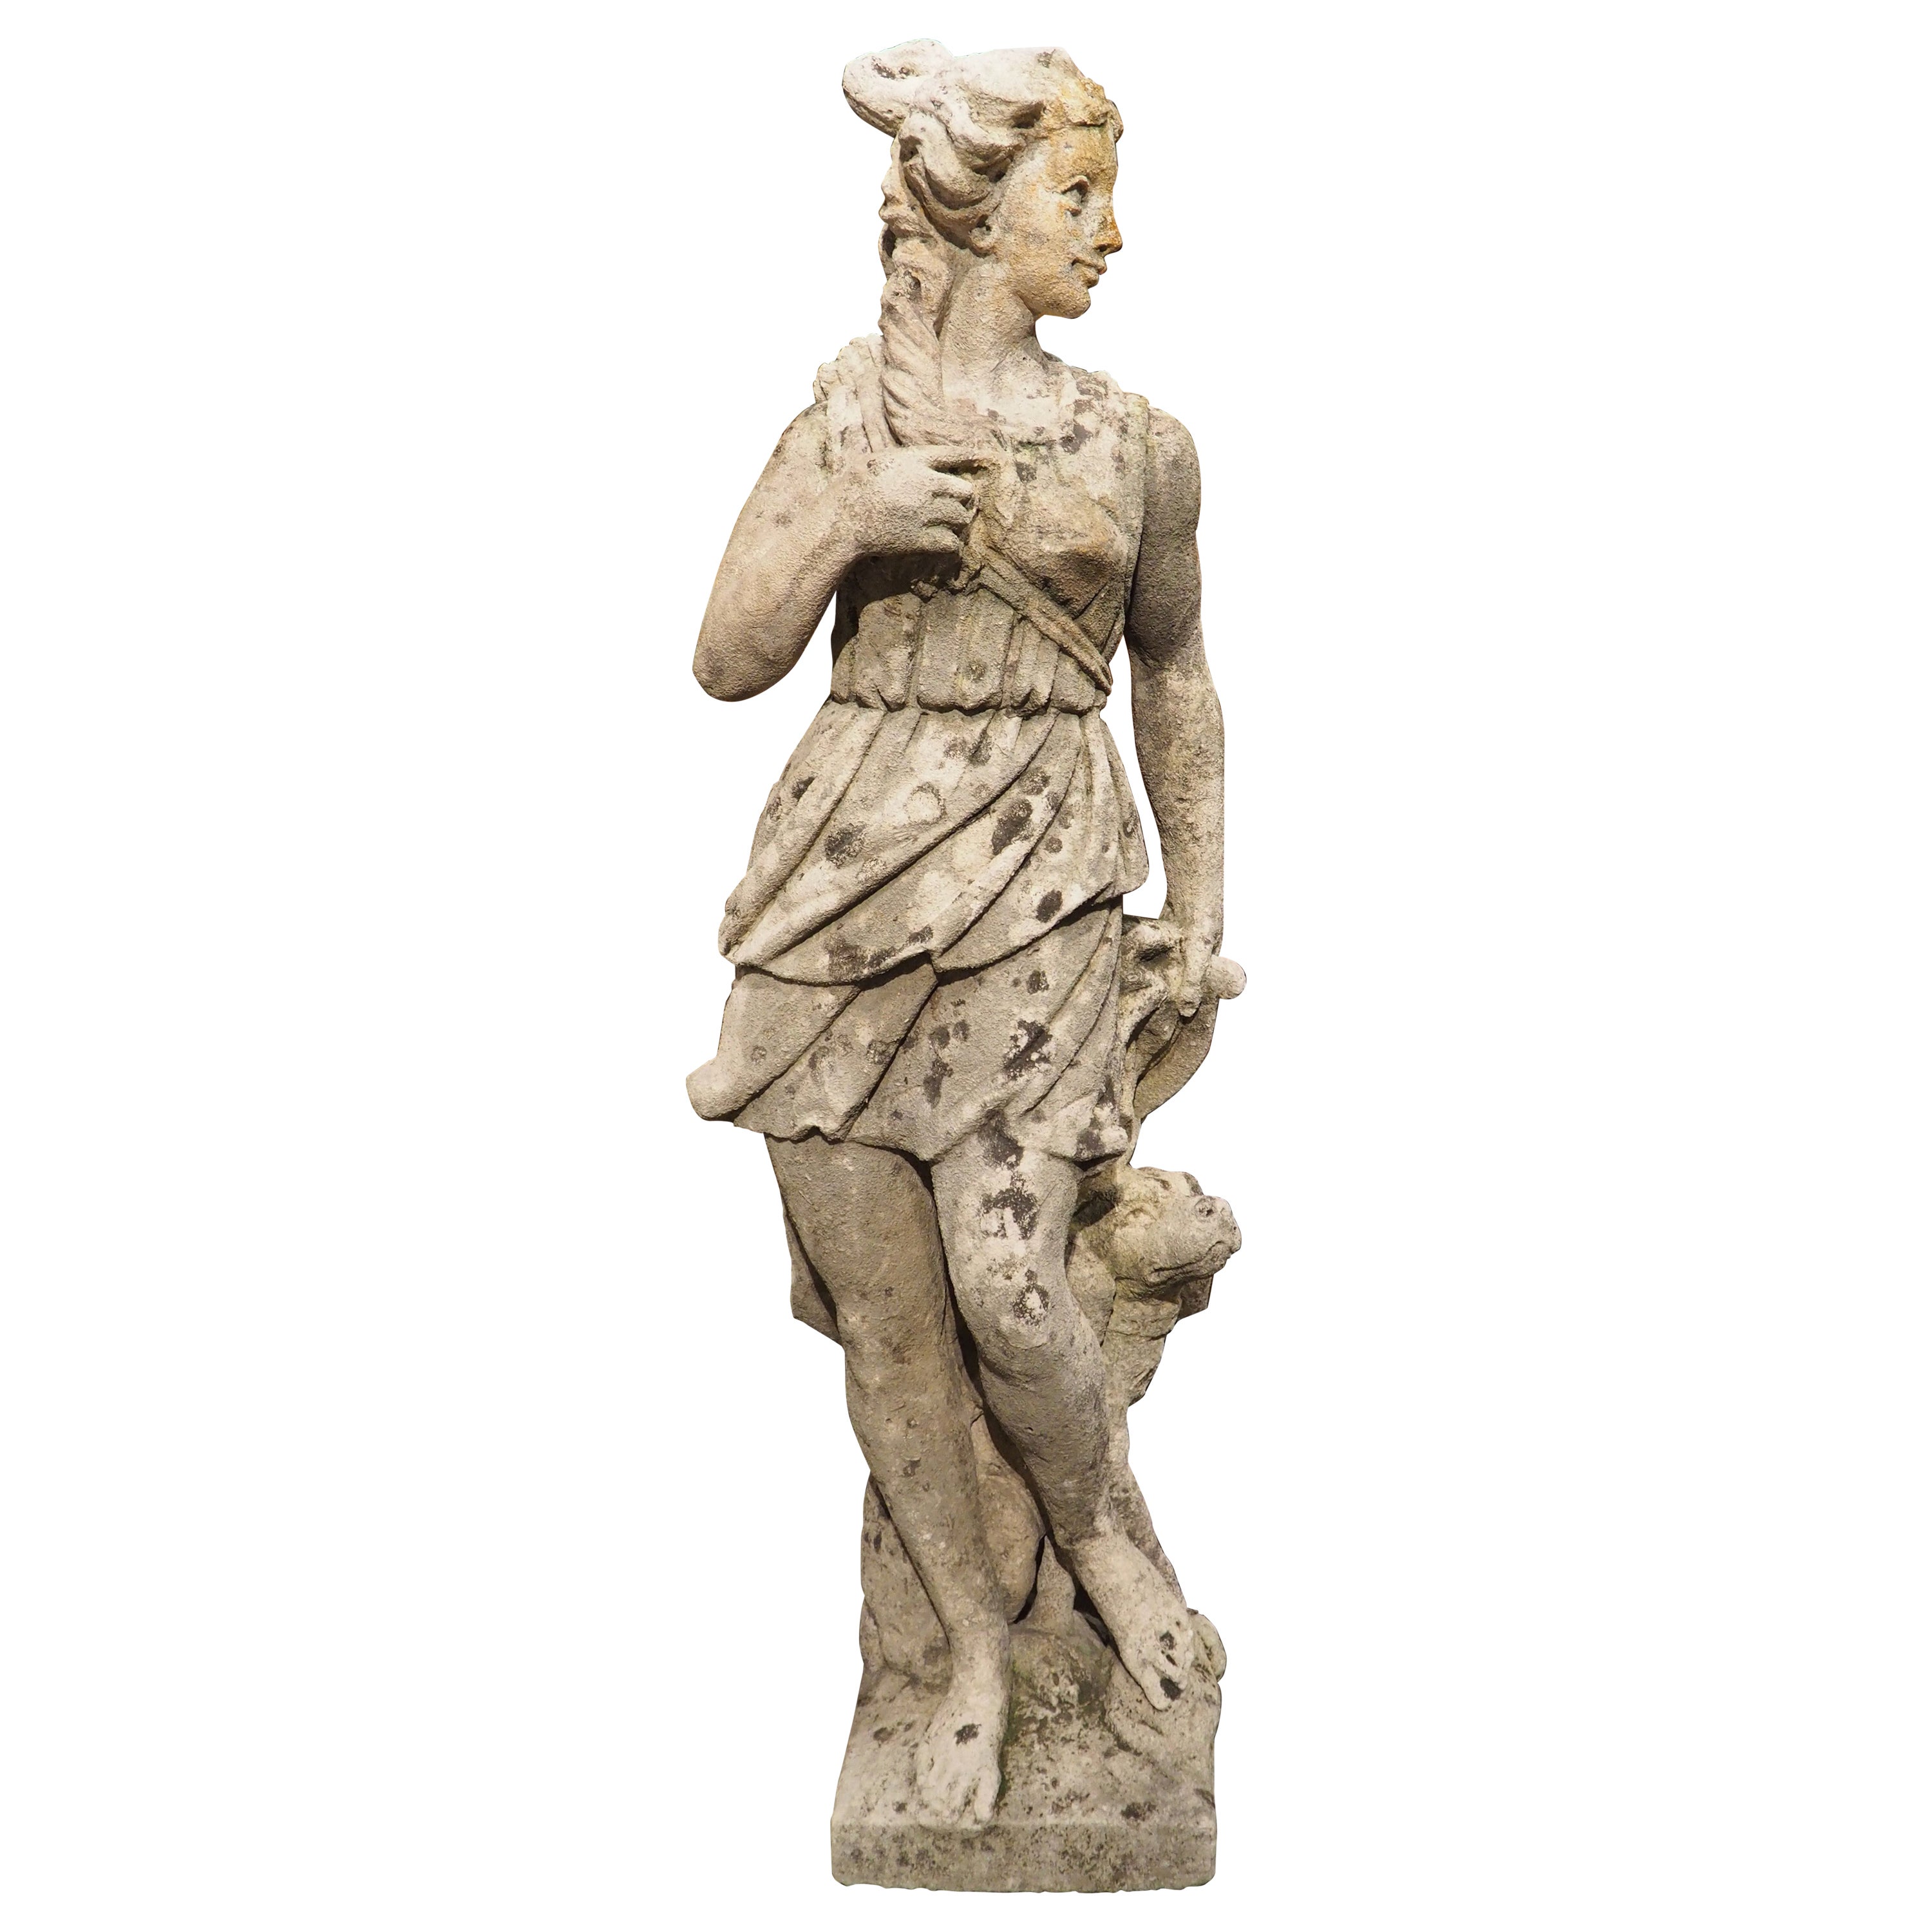 Antique Italian Limestone Statue of Diana the Huntress and Her Dog, C. 1890